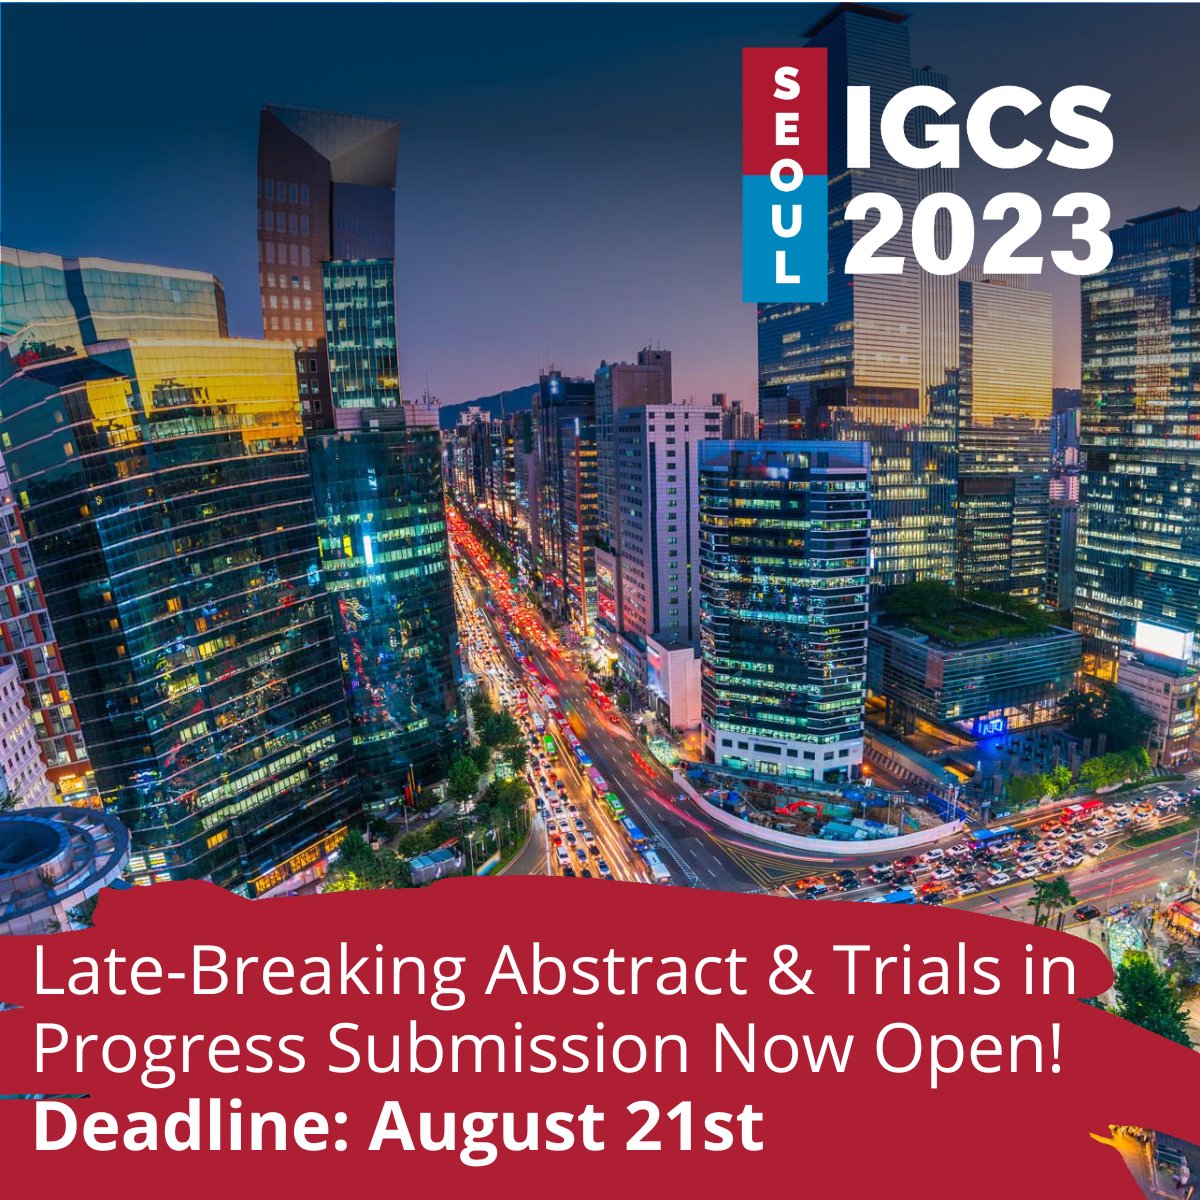 Submit your Late-Breaking Abstract or Trial in Progress now! Deadline is August 21st! #IGCS2023 #FillYourSoulInSeoul 

igcsmeeting.com/submit-an-abst…